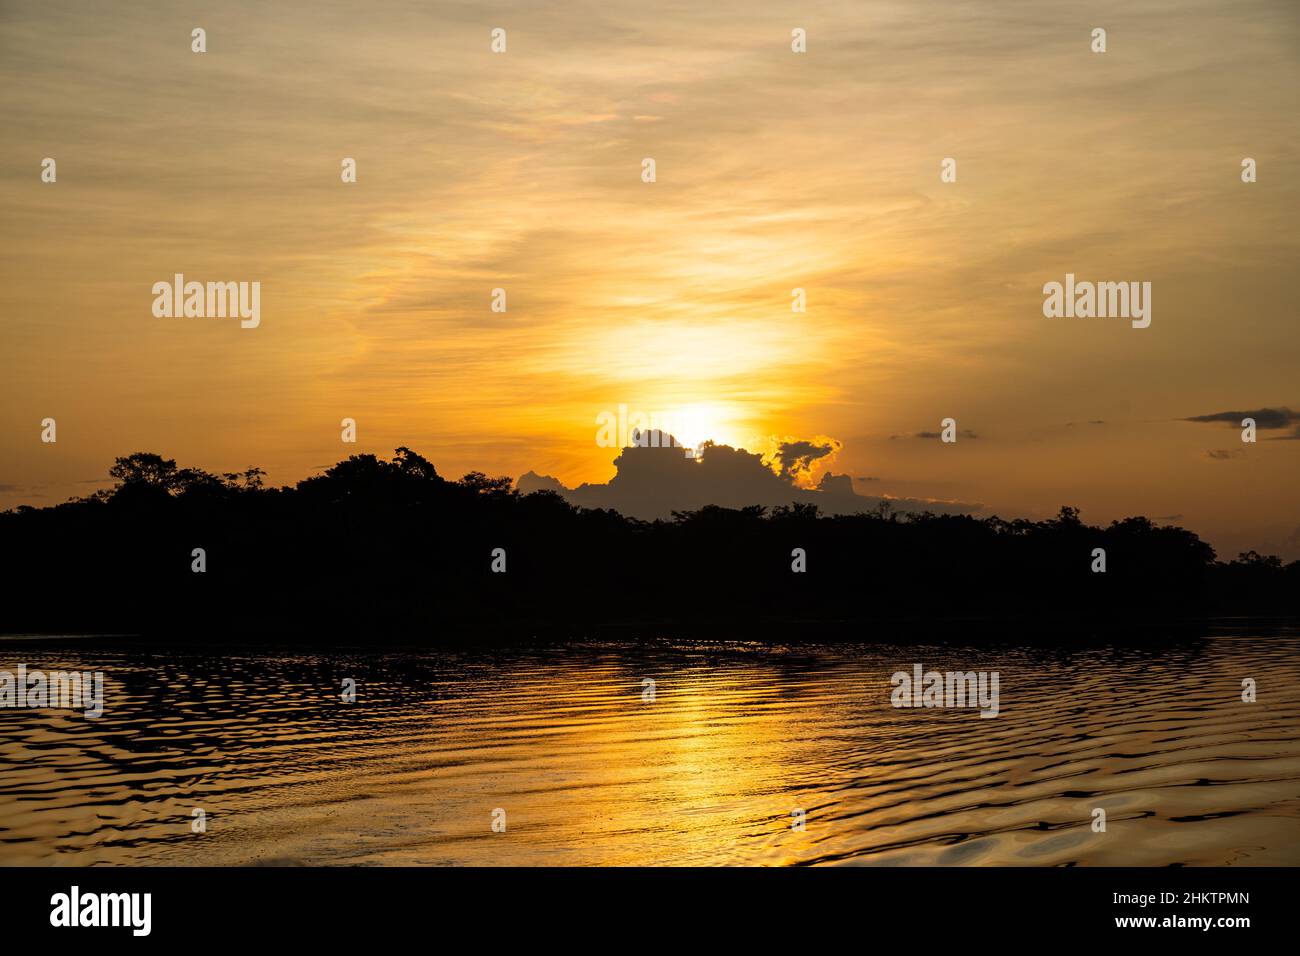 Sunset on the shores of Puerto Nariño, Amazonia, Colombia. Stock Photo